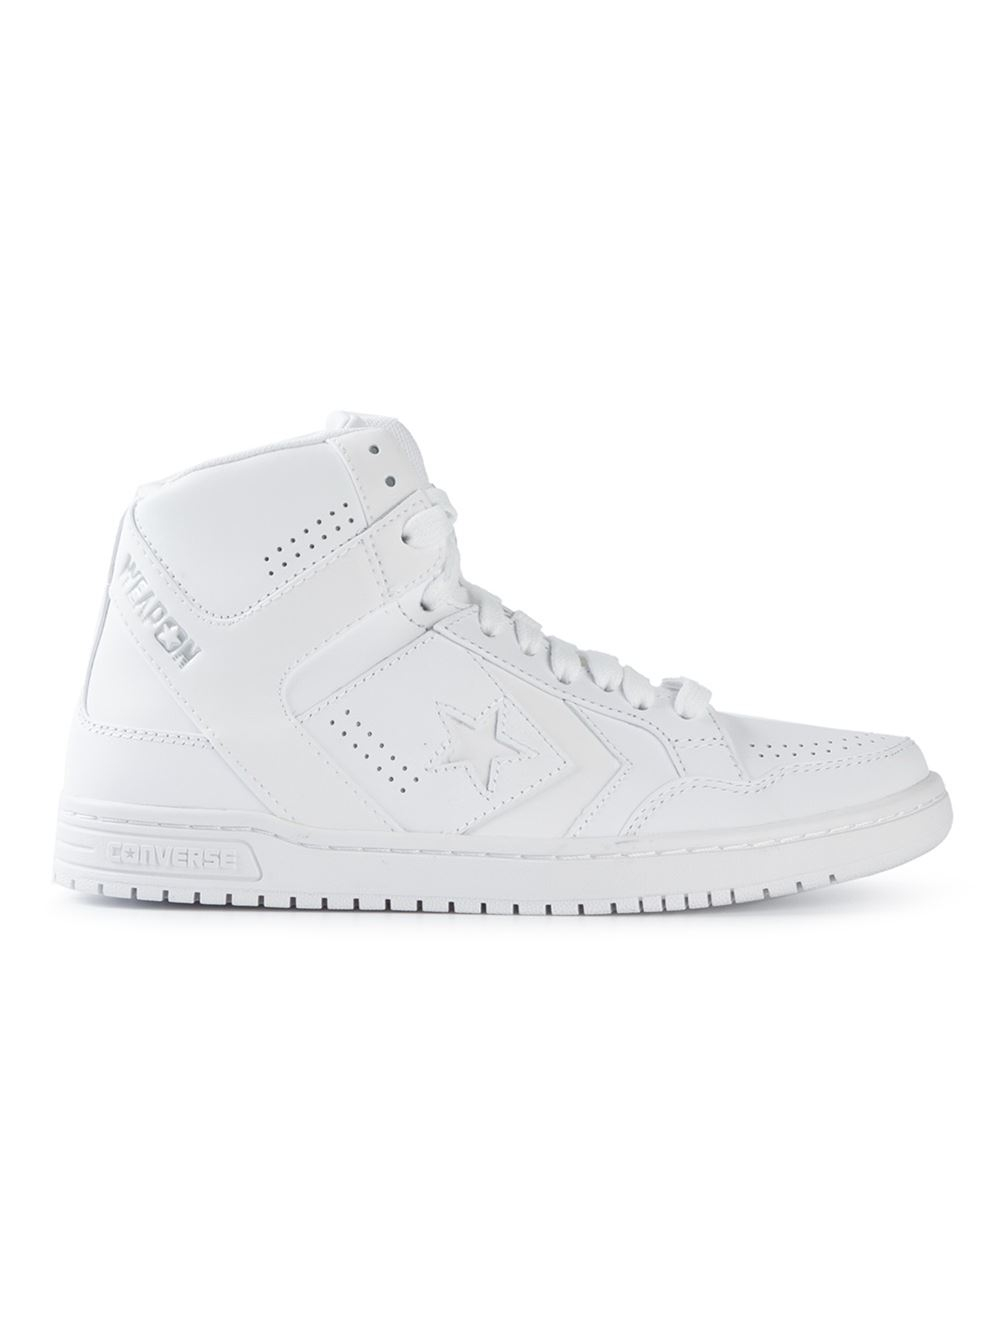 Converse 'Weapon' Hi-Top Sneakers in White for Men | Lyst